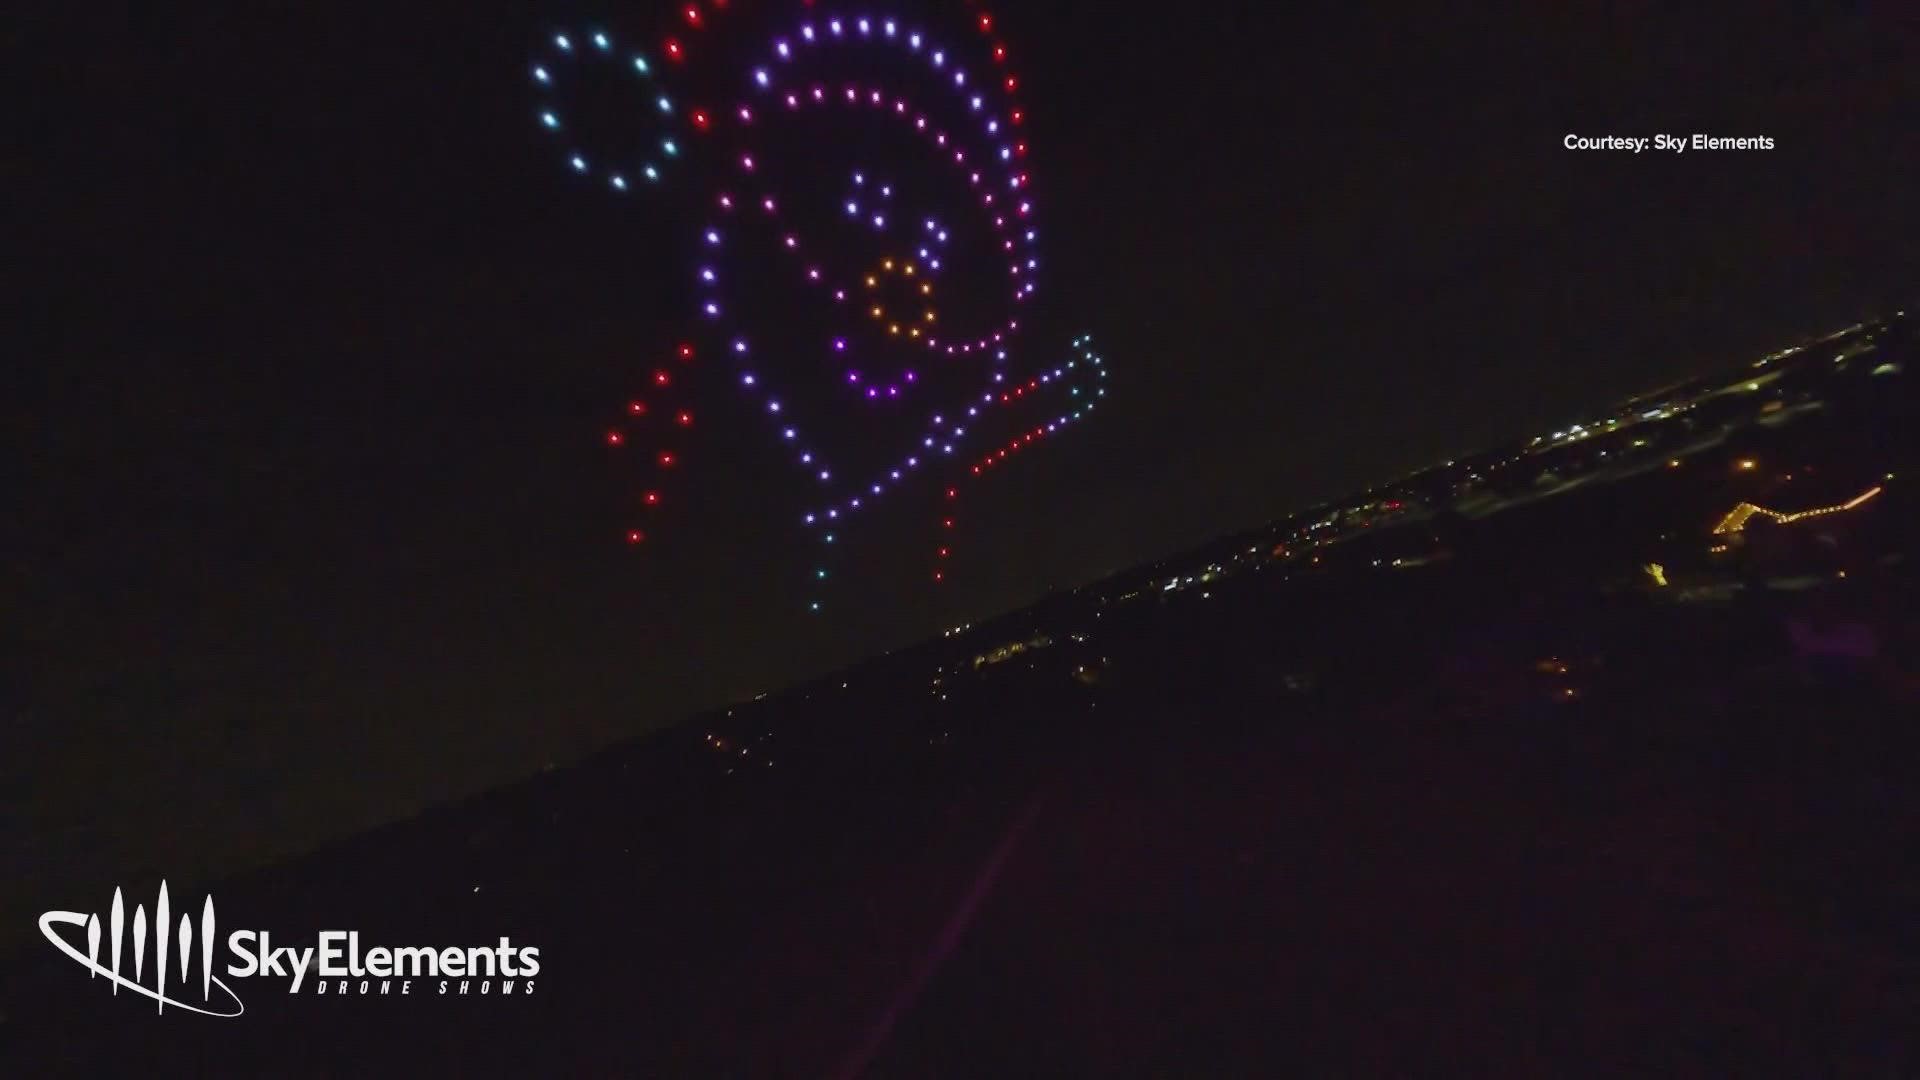 Sky Elements is only two years old, but is one of the top drone light show companies in the country.